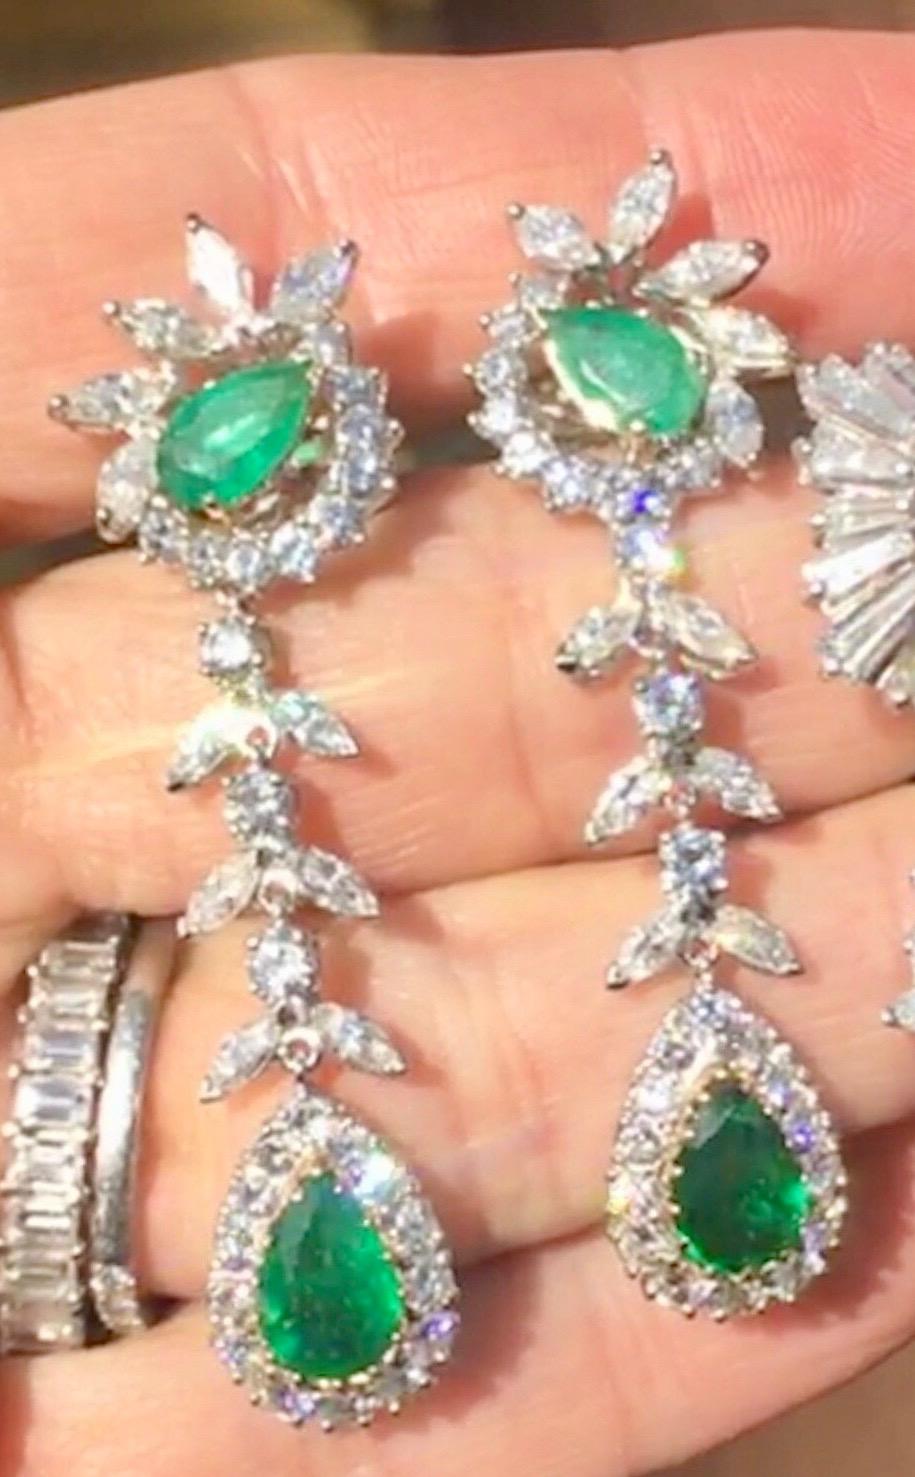 These amazing estate emerald diamond pendnat earrings are the epitome of chic, elegant, classy and high sparkle & drop dead gorgeous color!  Shown here are various inside / outside pictures. They will light up and glow when they hit sunlight or more